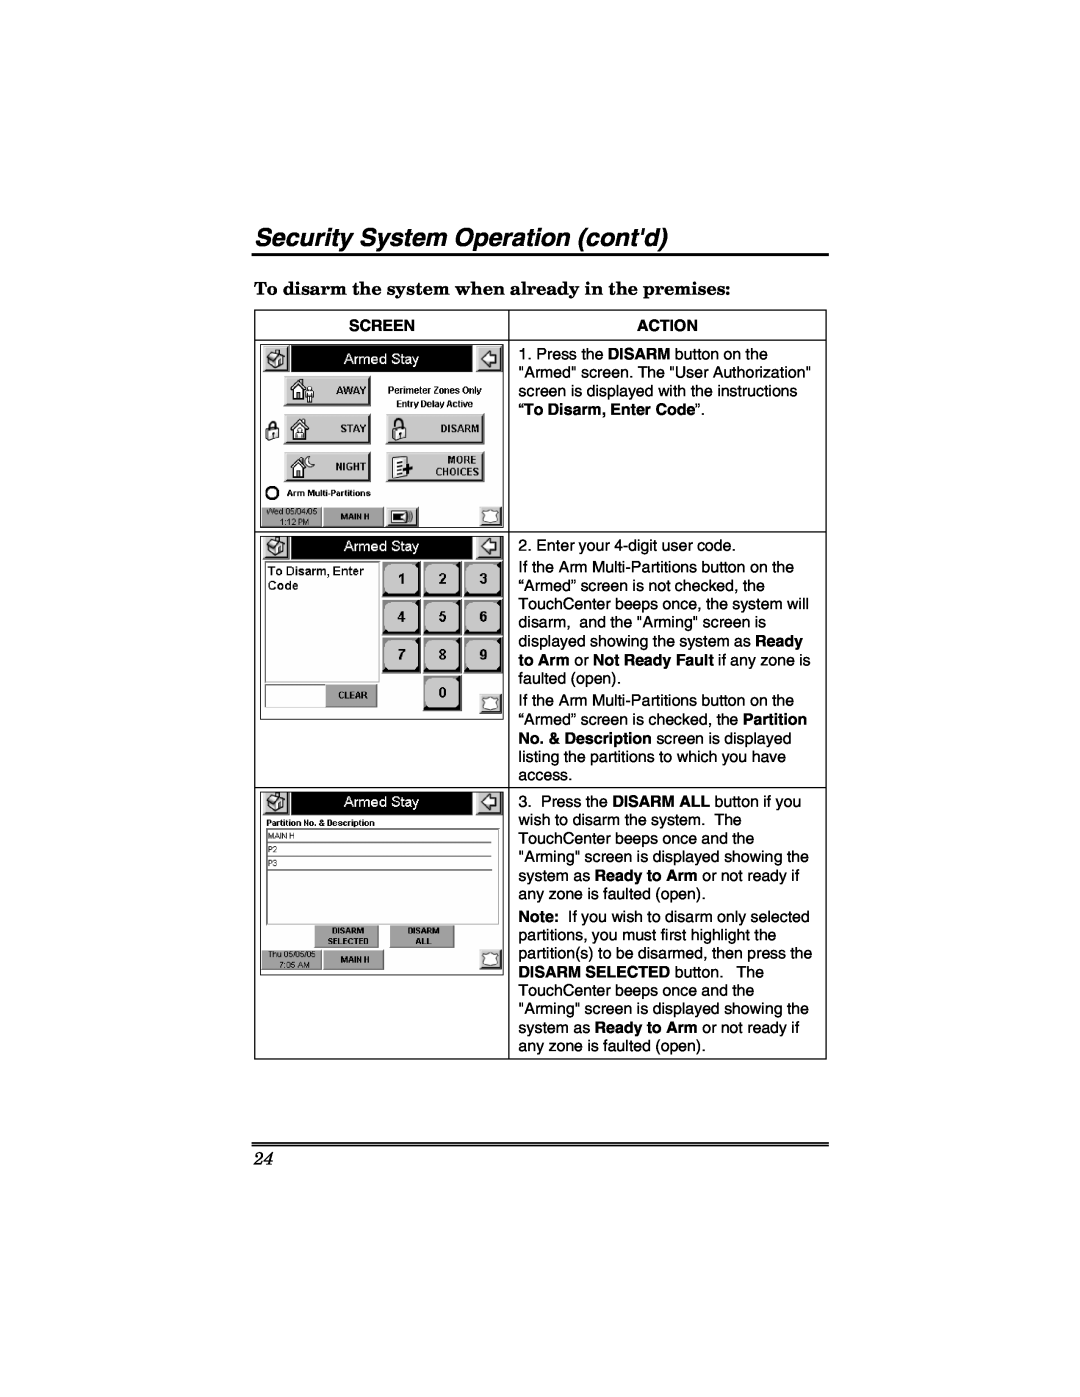 Honeywell 6271V manual To disarm the system when already in the premises, Security System Operation contd, Screen, Action 